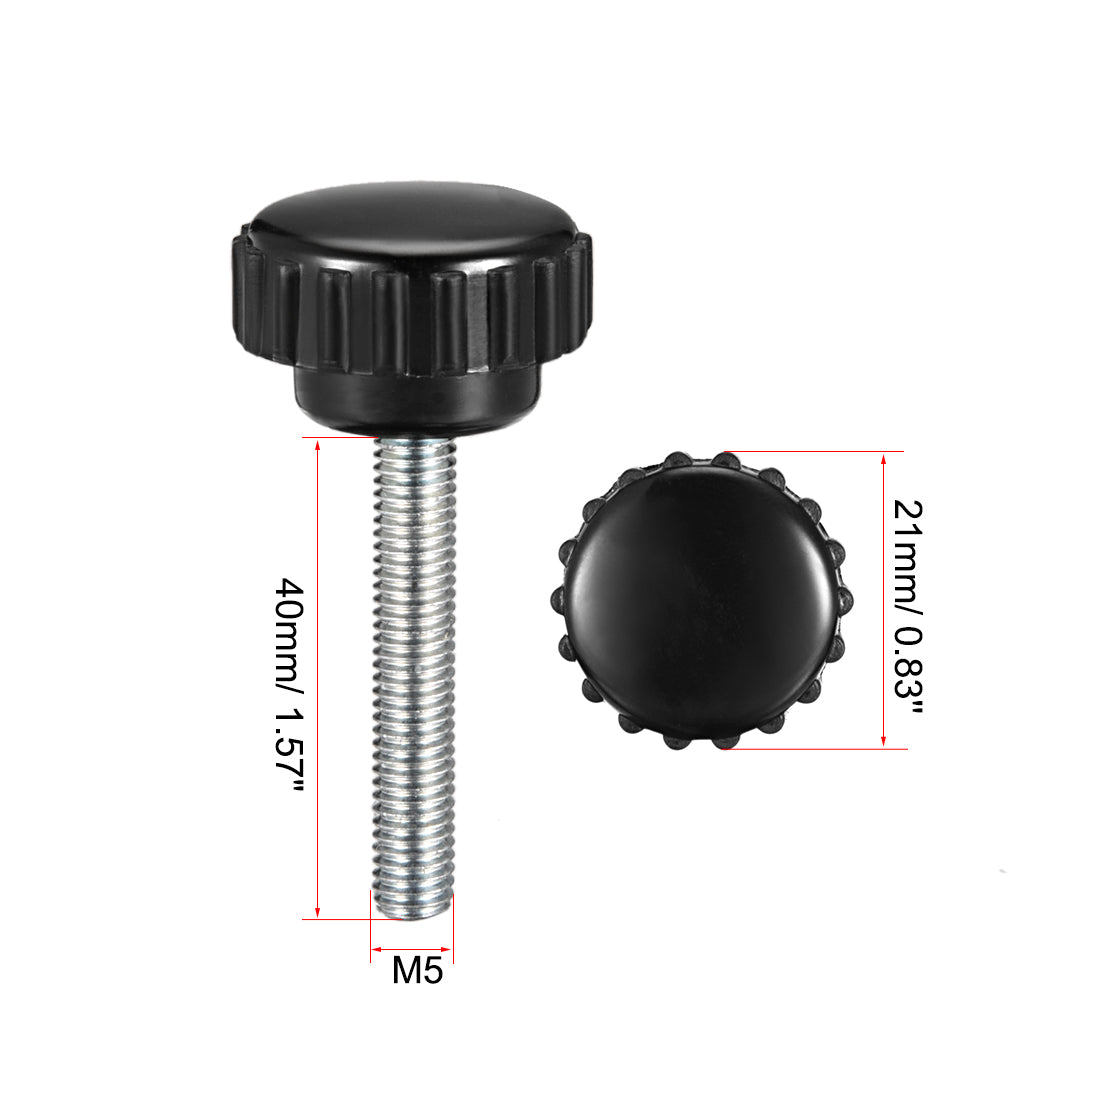 Uxcell Uxcell M5 x 10mm Male Thread Knurled Clamping Knobs Grip Thumb Screw on Type  4 Pcs